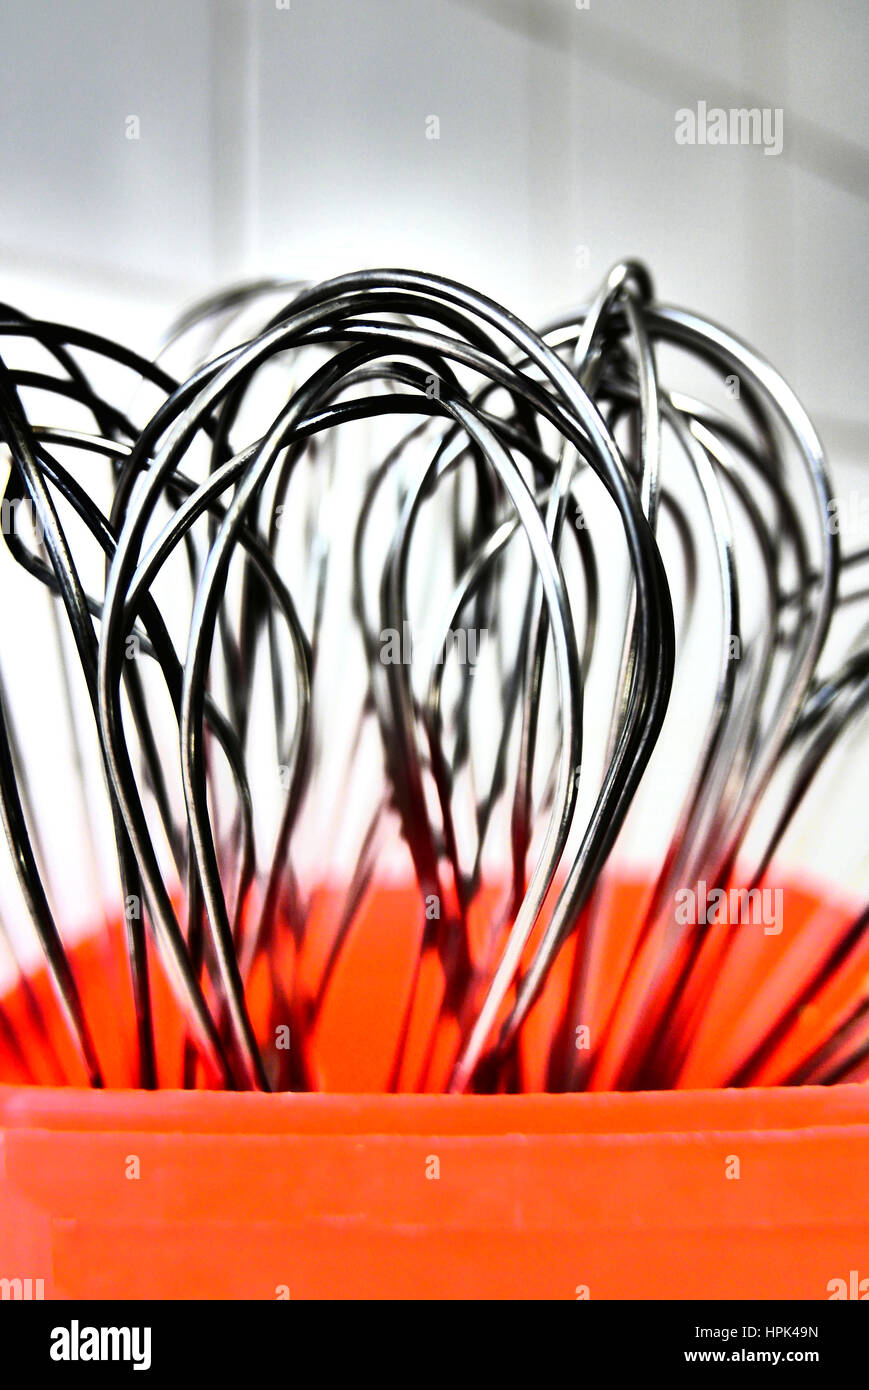 Metal food whisks in red plastic container against white tiled kitchen background Stock Photo